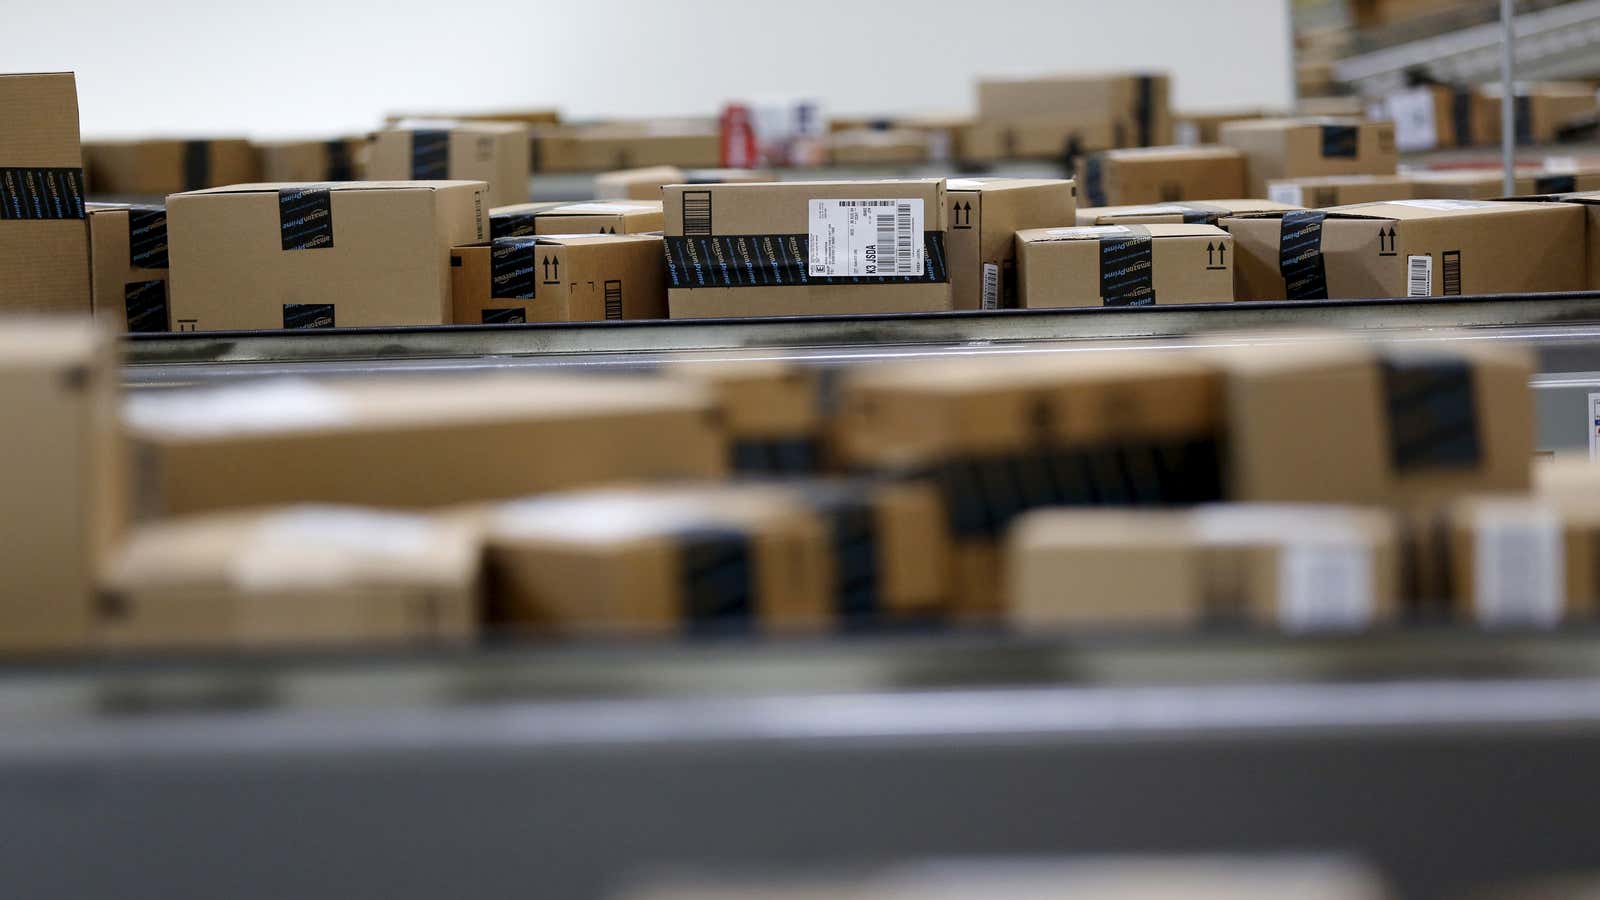 Counterfeiters selling on Amazon might think twice if they have to provide more identification before listing items for sale.